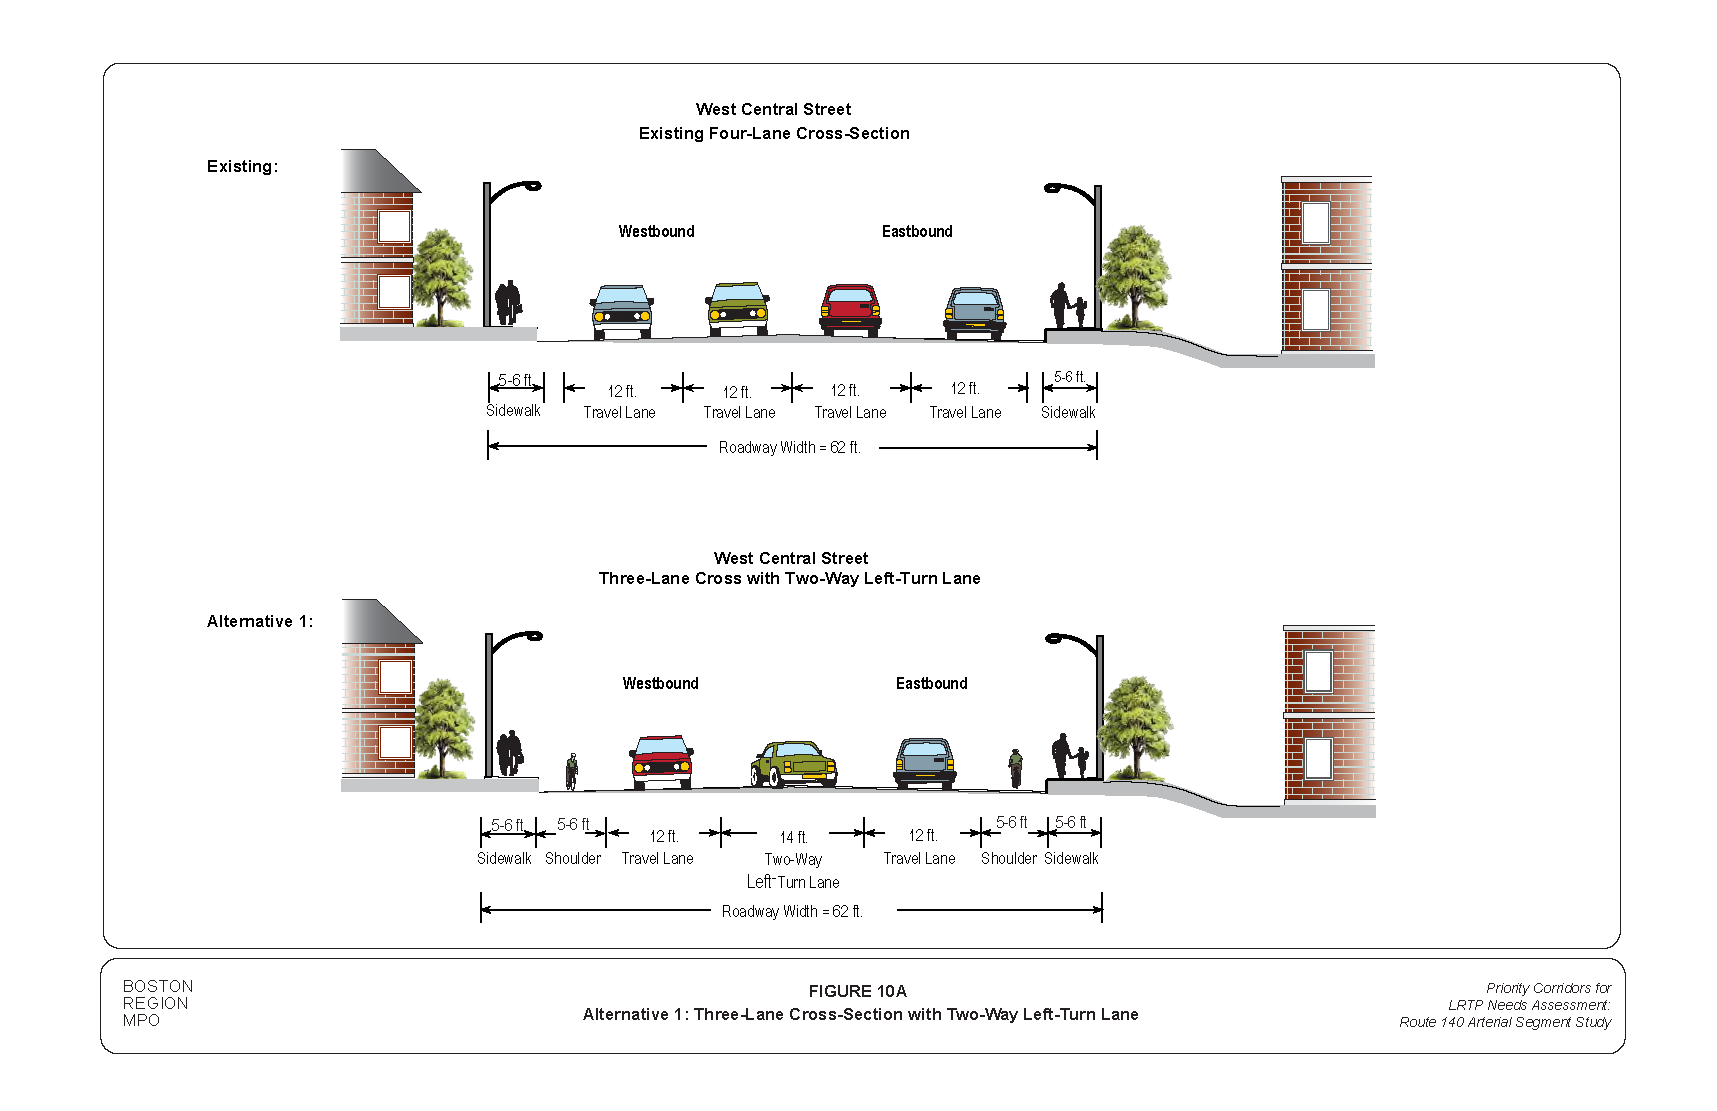 FIGURE 10A: Alternative 1: Three-Lane Cross-Section with Two-Way Left-Turn Lane. Computer-drawn roadway cross-section that portrays MPO staff “Improvement Alternative 1,” which recommends reconfiguring West Central Street into a three-lane cross-section with two-way left-turn lane.